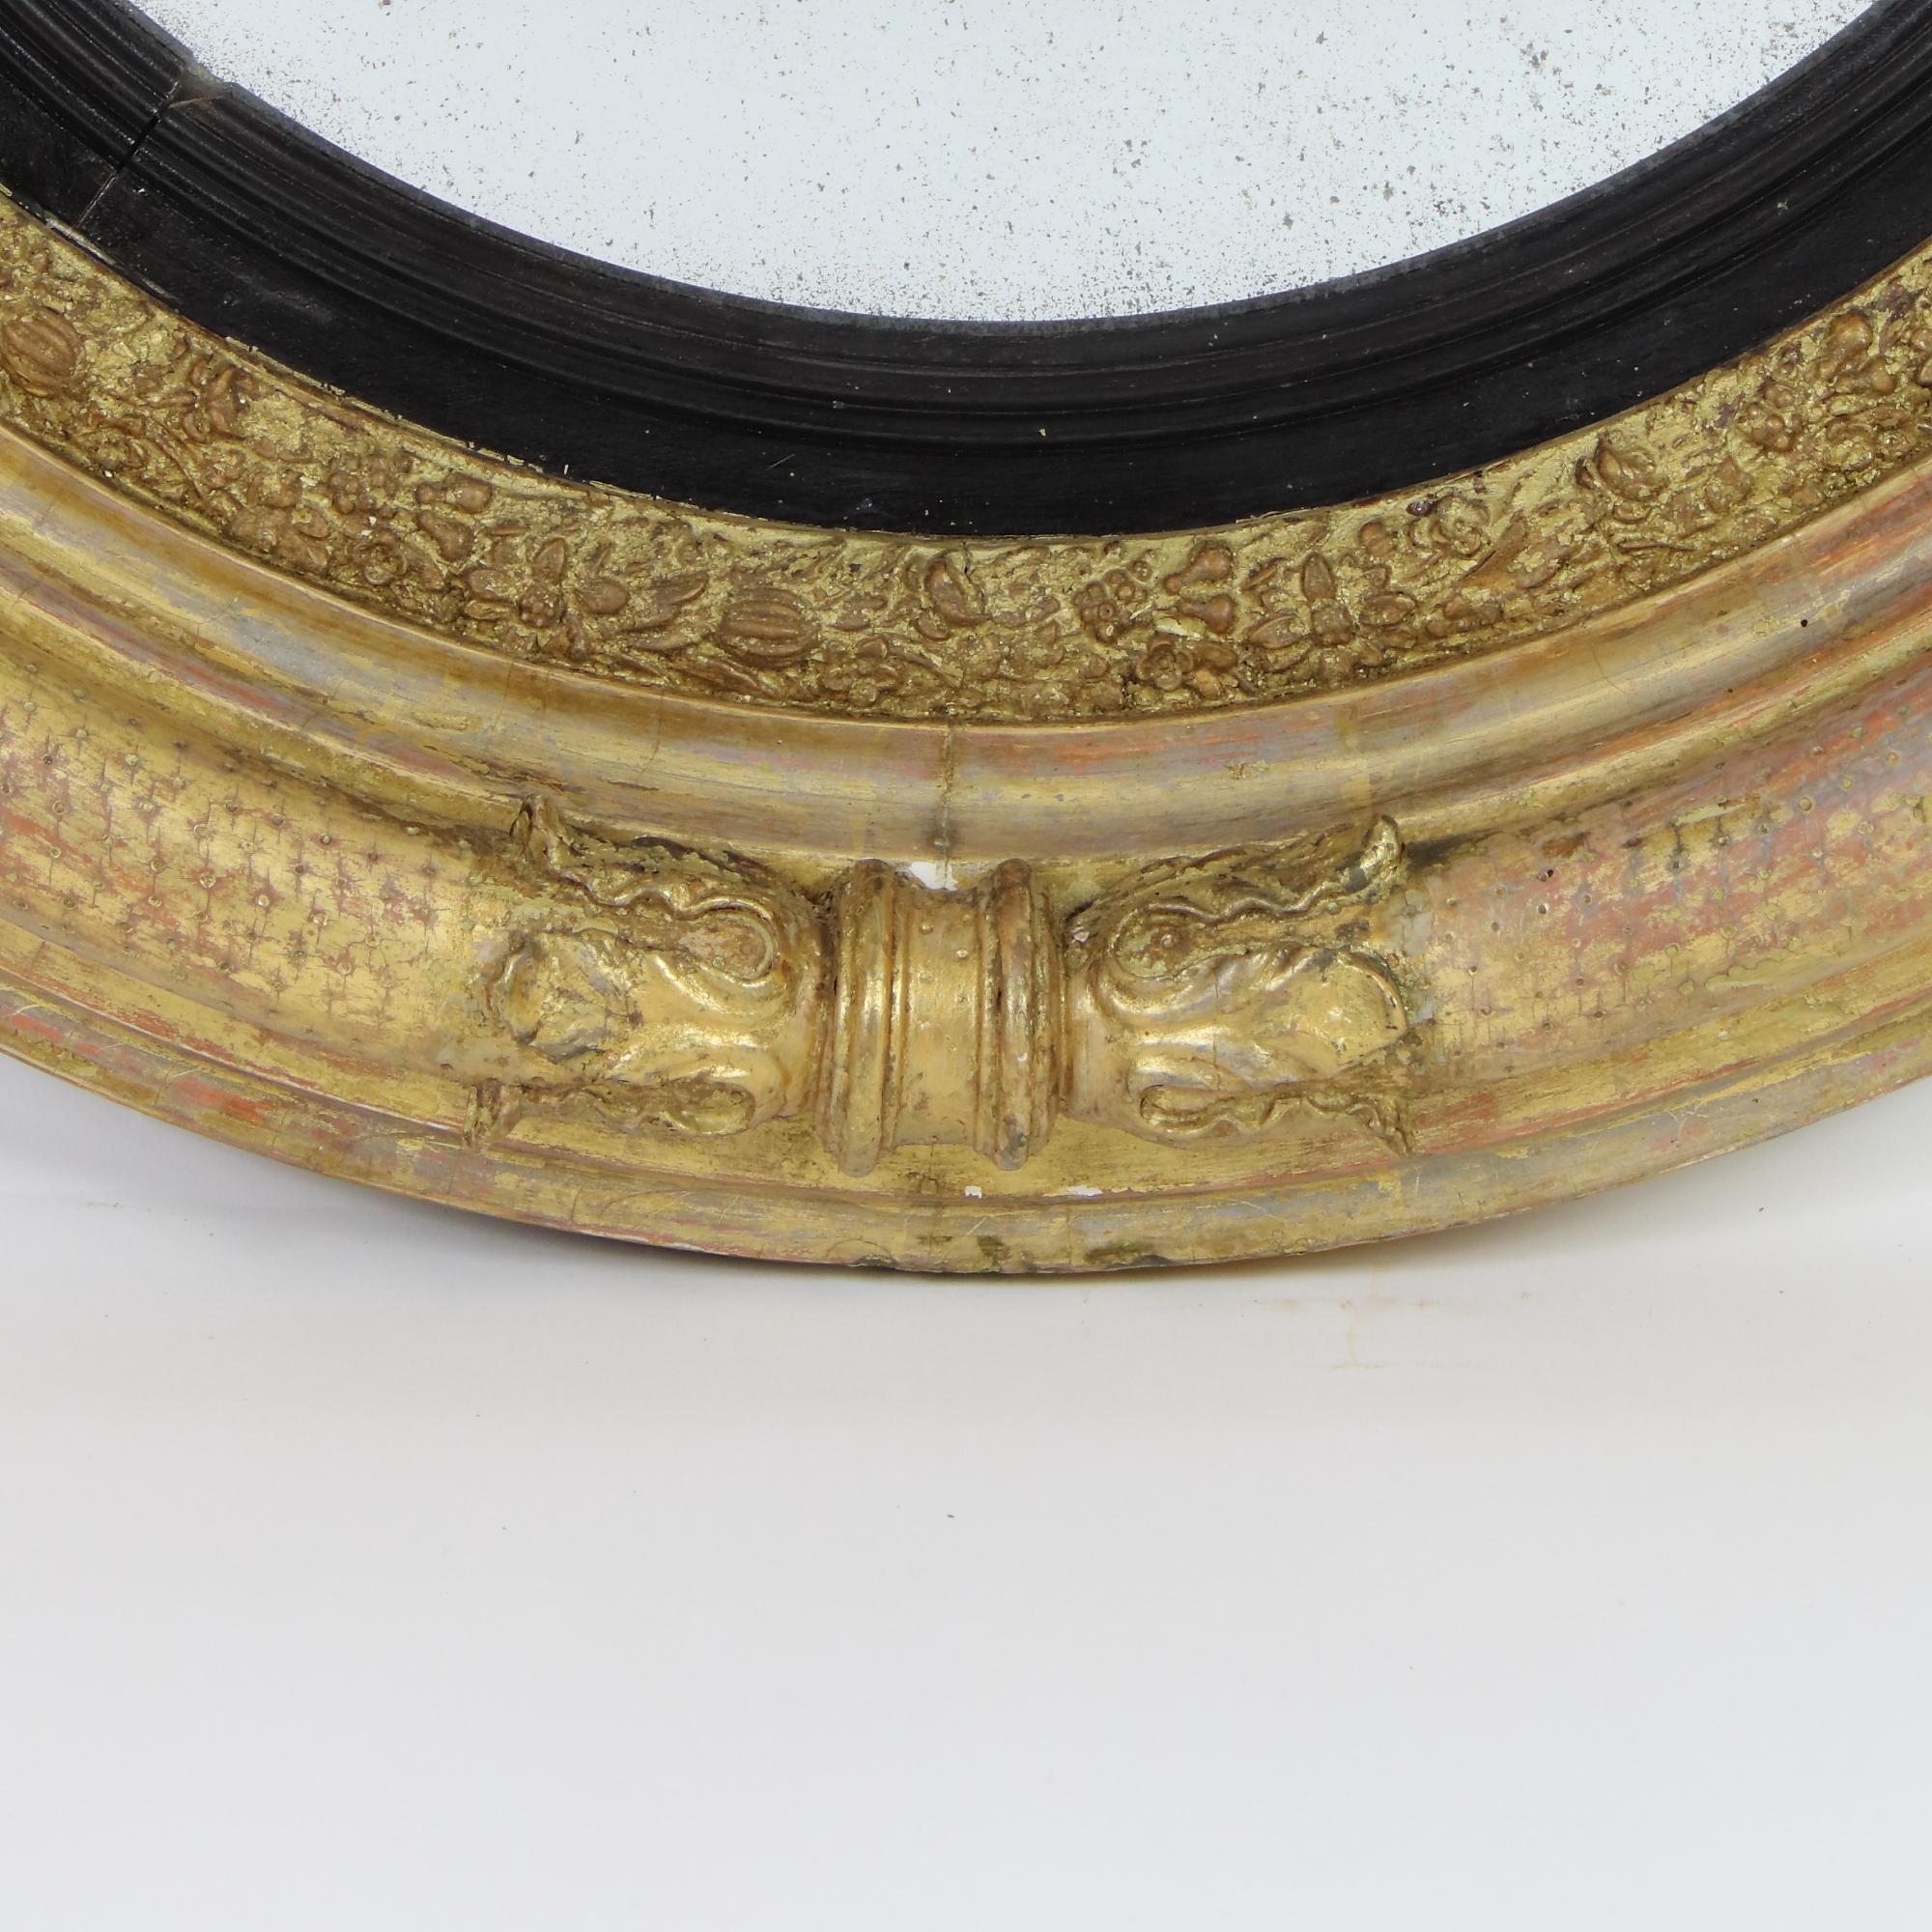 Early 19th Century Regency/Georgian Giltwood Circular Convex Butler's Mirror

Circular molded frame made of gilt and partially ebonized wood, decorated with rope-like elements with acanthus-leaf-joints, and  fine floral banding. Original convex